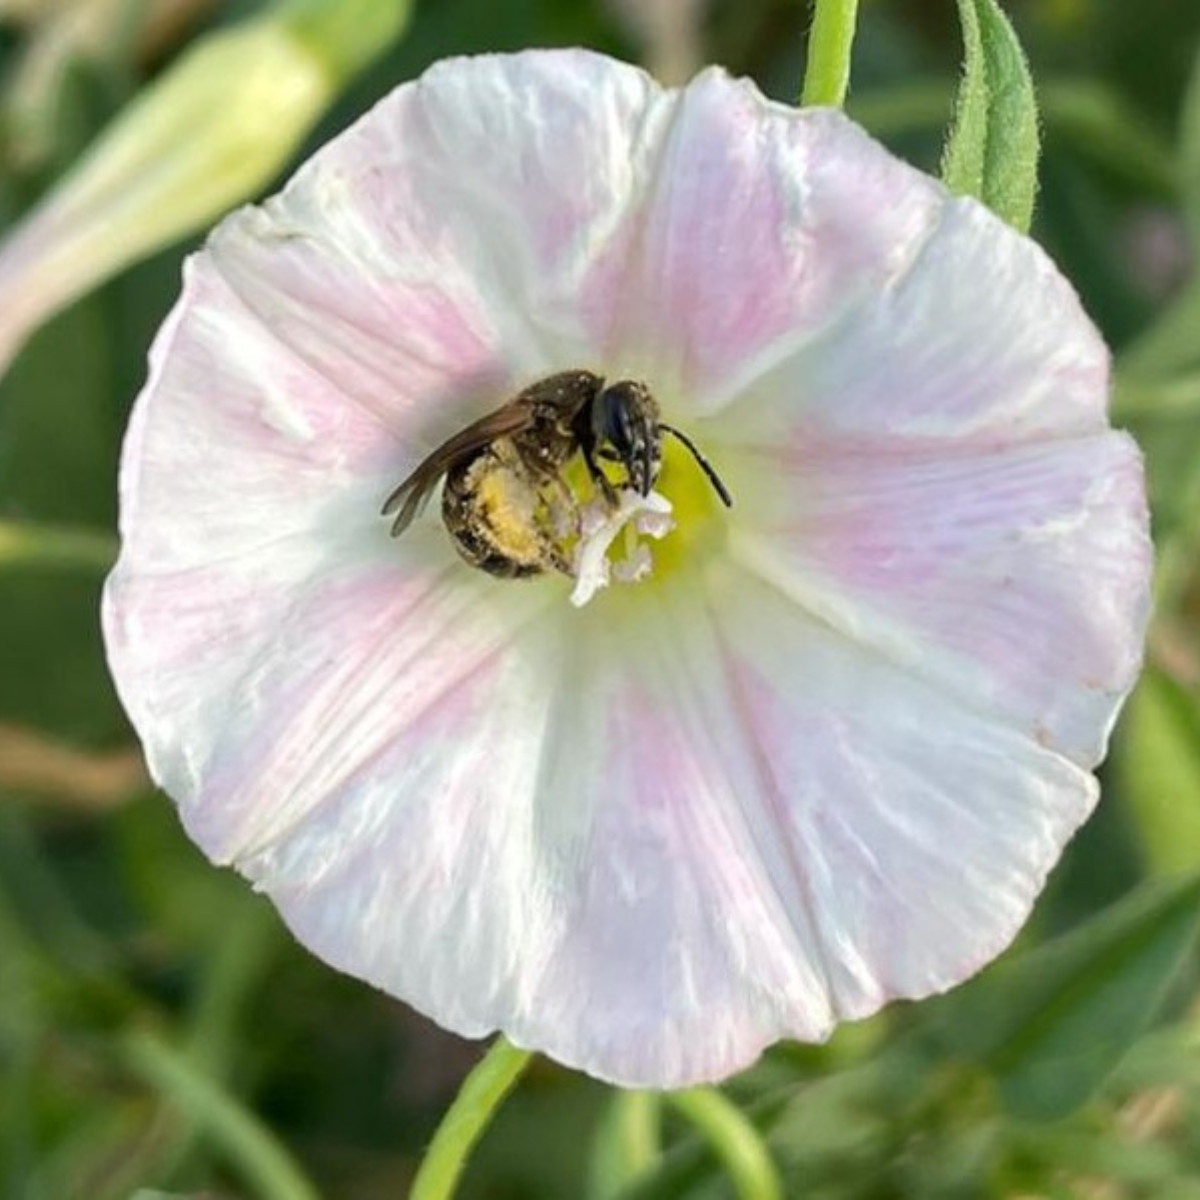 Bee resting on a flower.